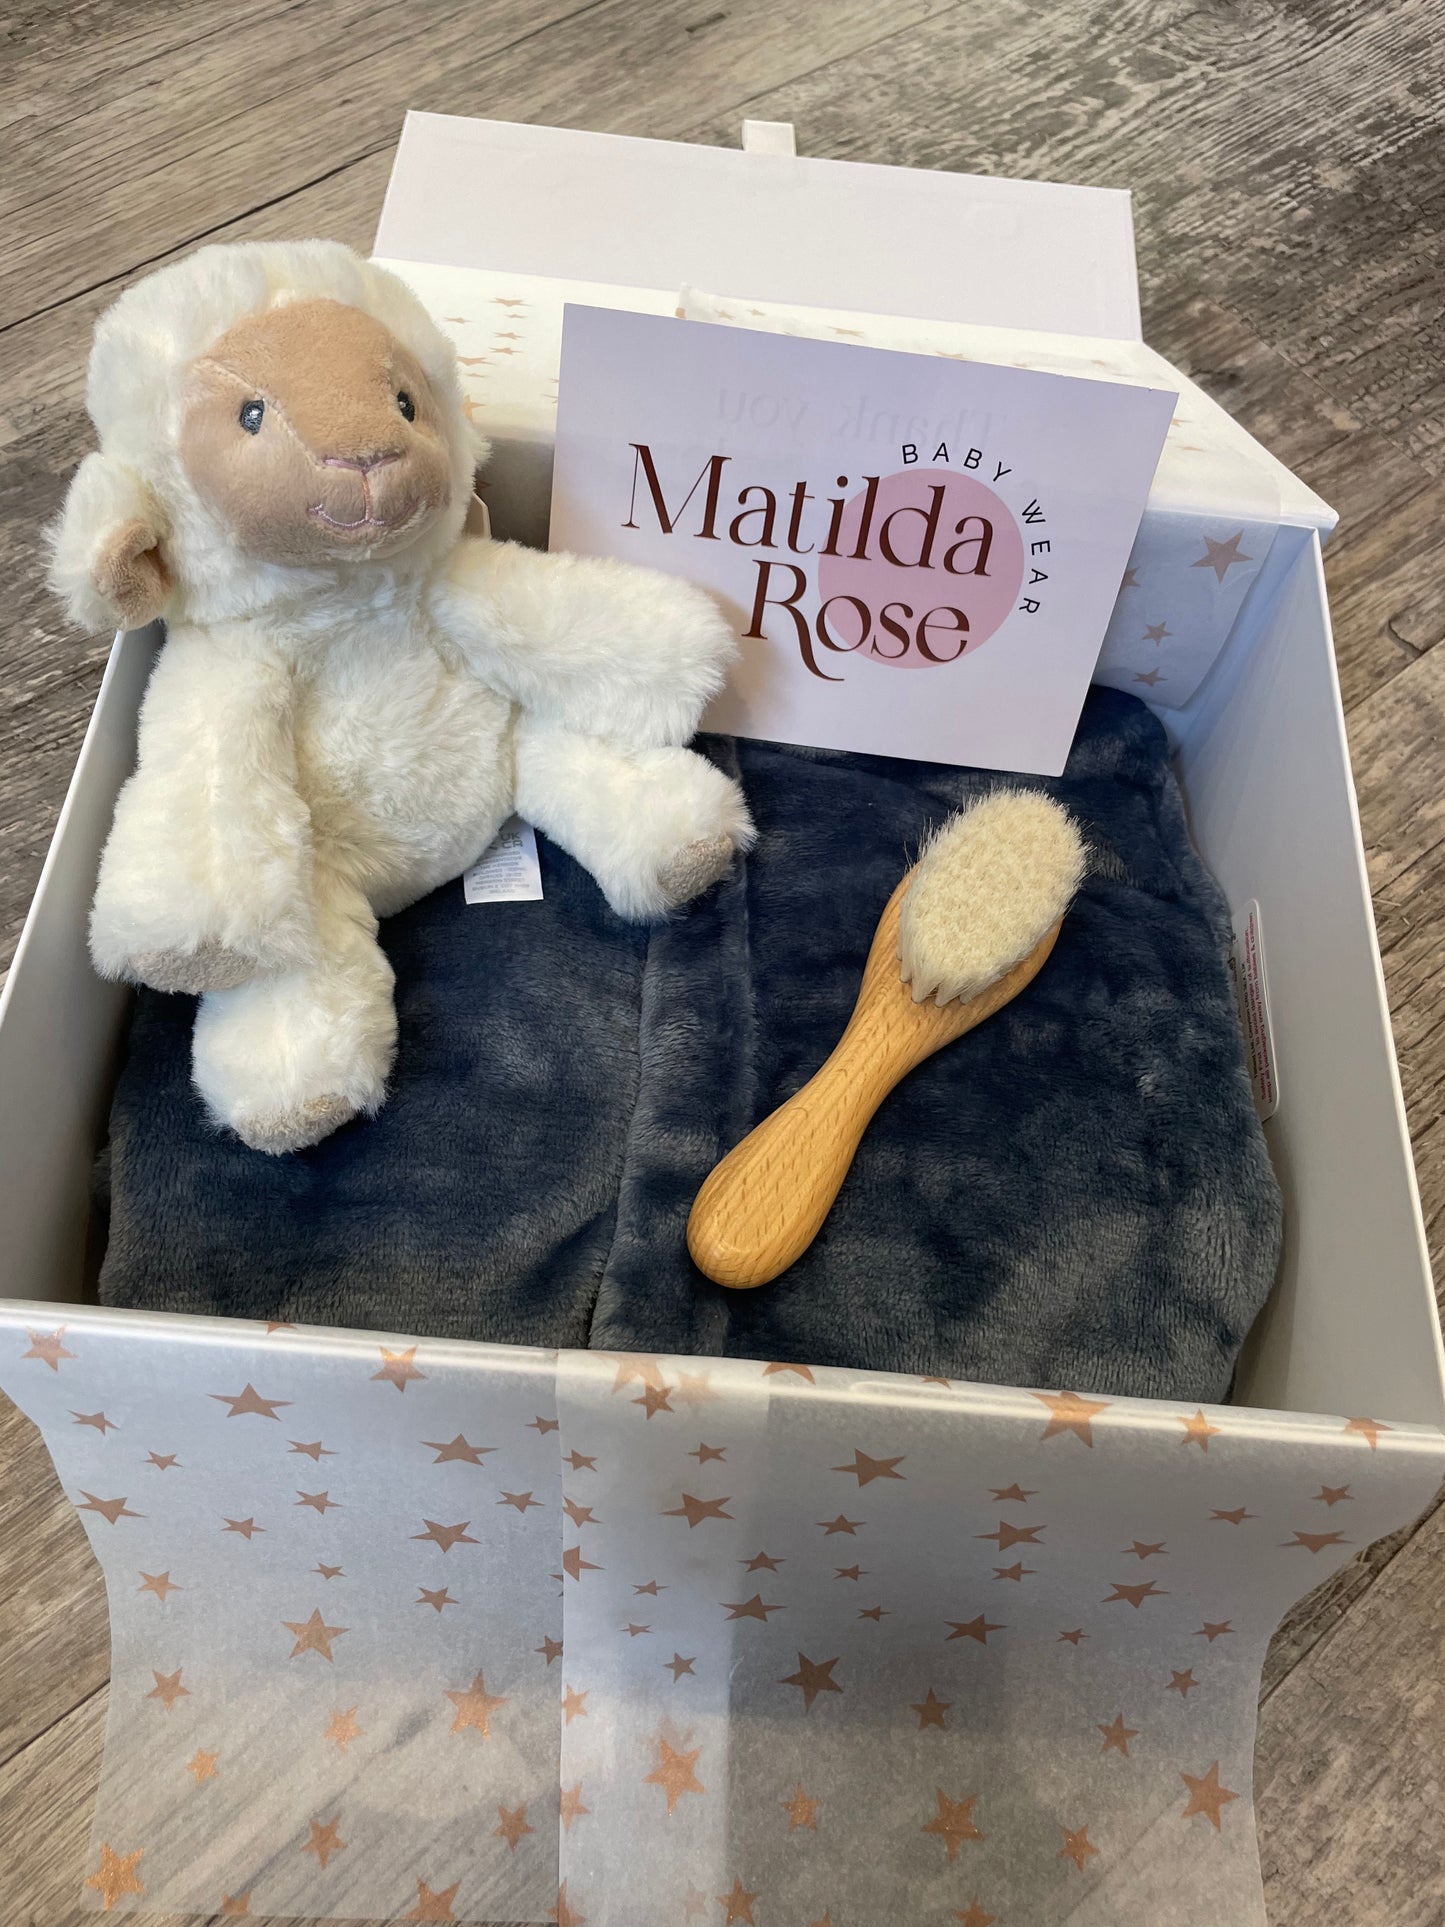 The Personalised dressing gown gift box